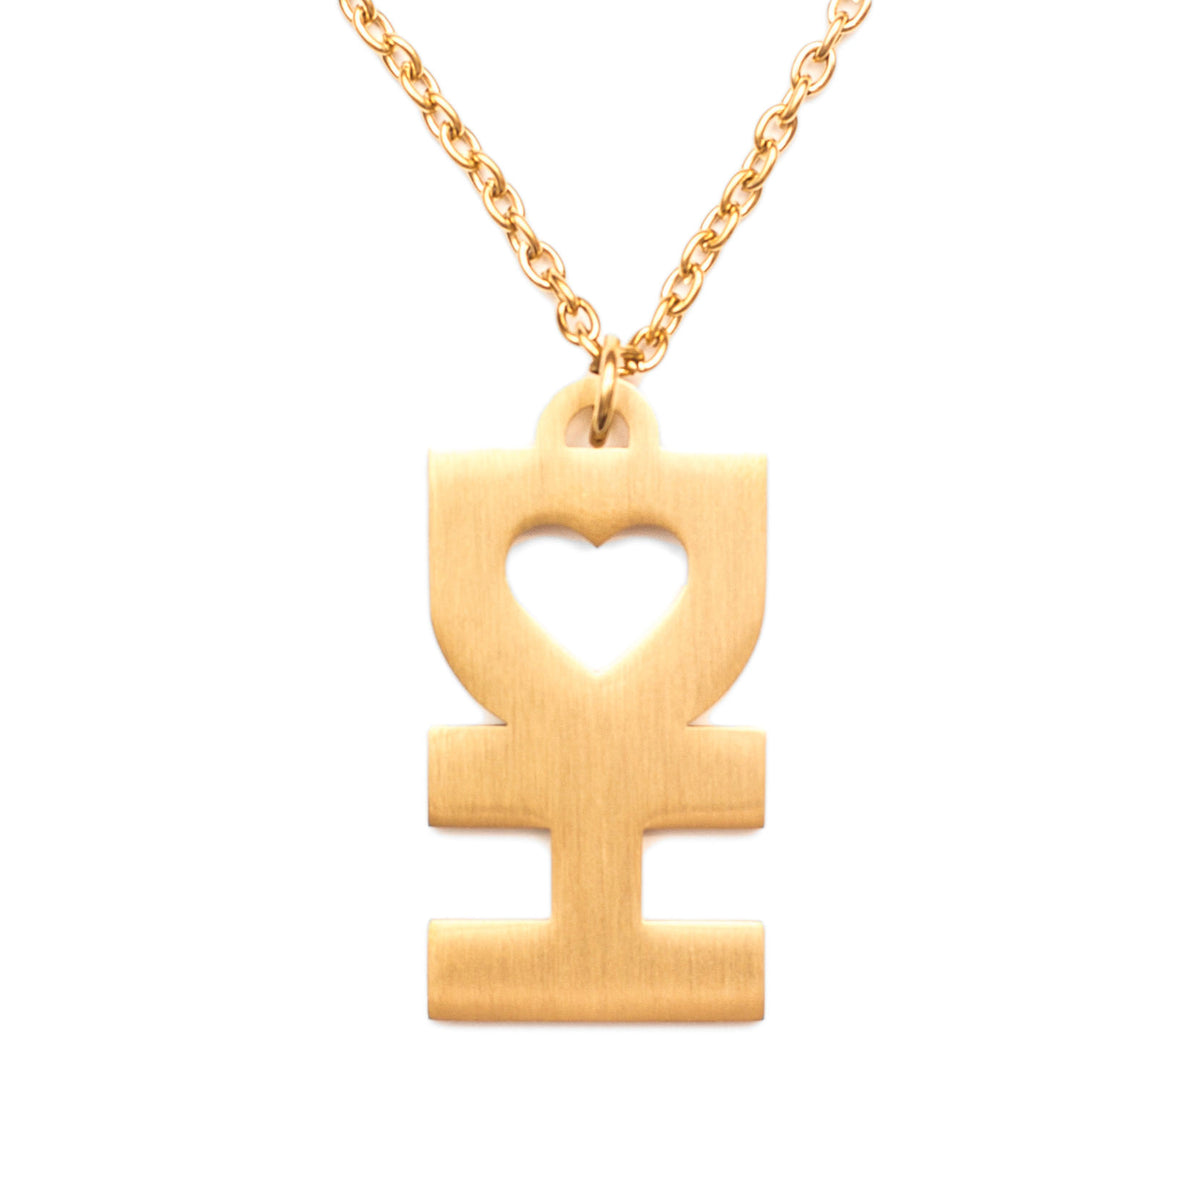 DH MAN NECKLACE IN FLAT GOLD